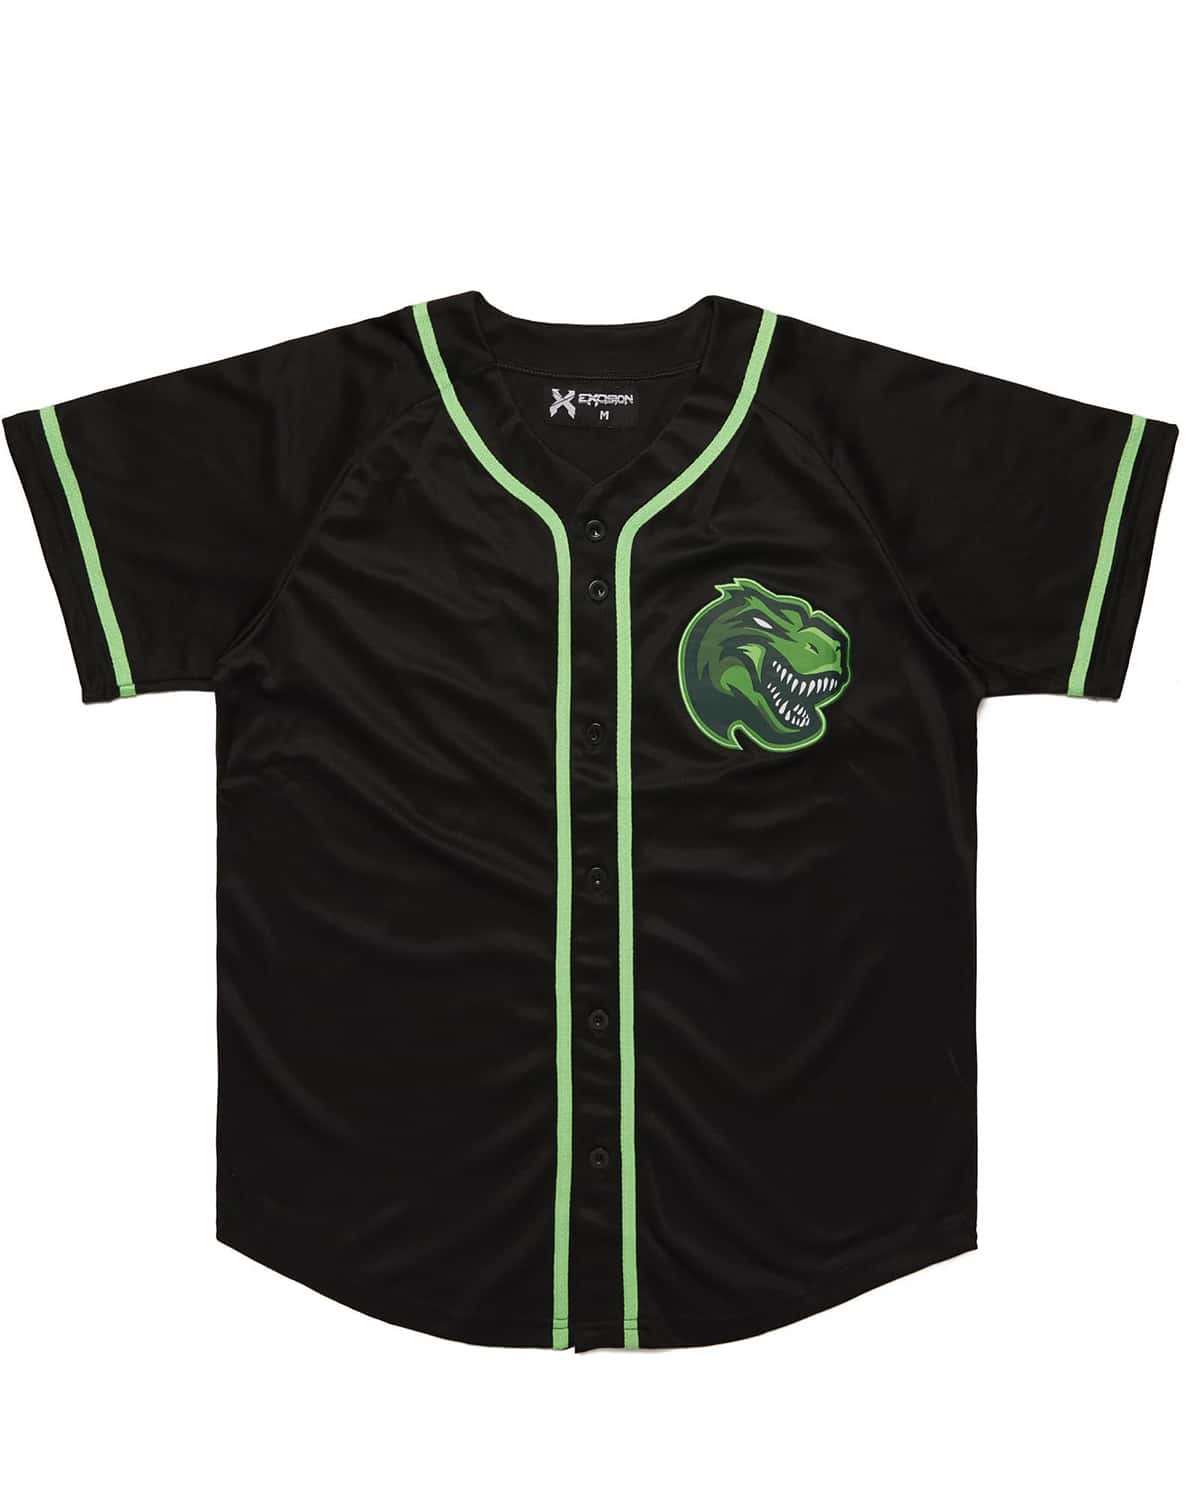 jersey green and black